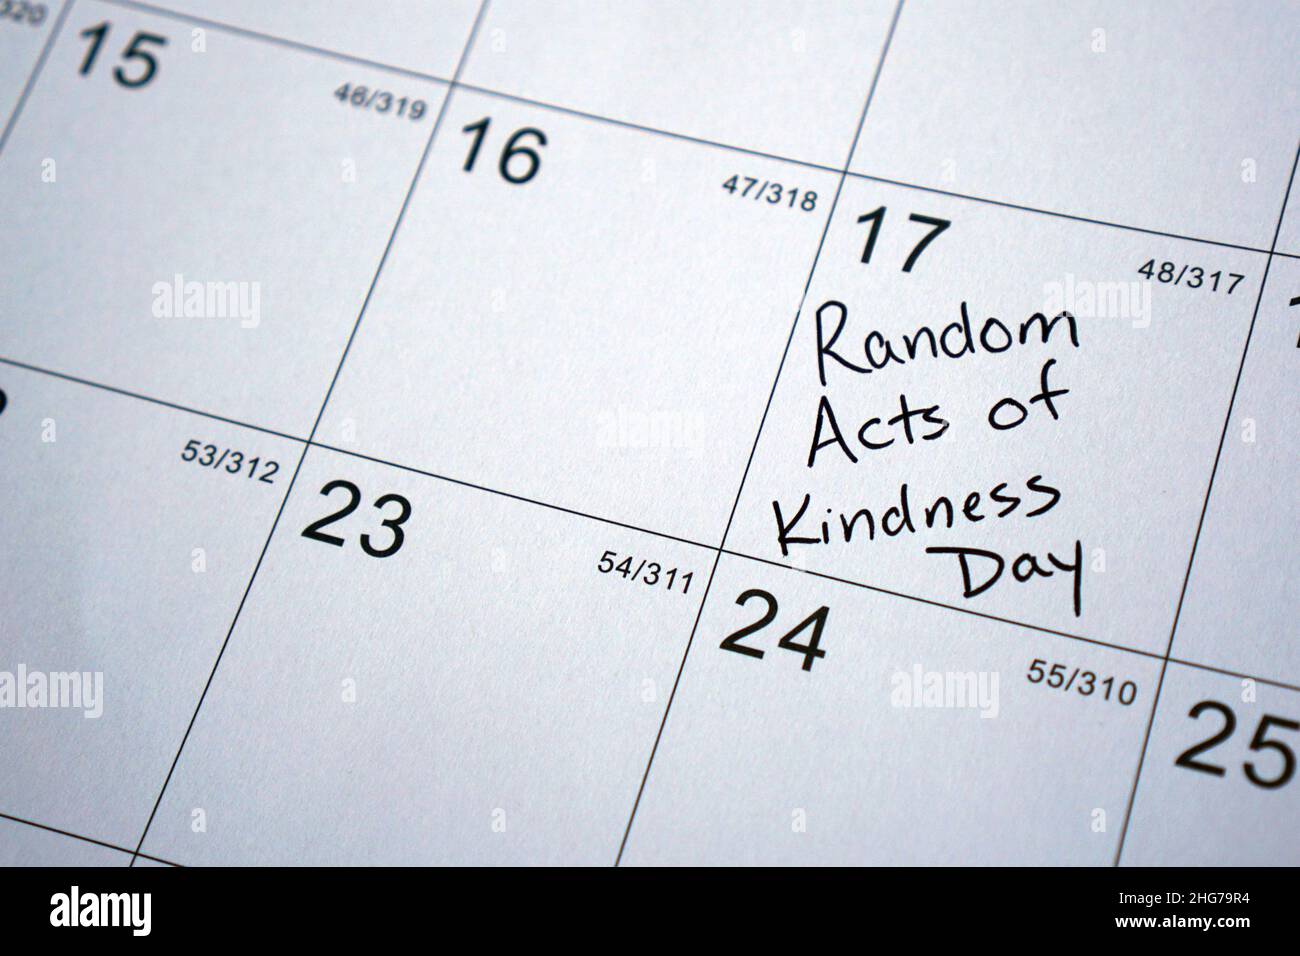 Calendar reminder about Random Acts of Kindness Day celebrated on February 17. Stock Photo